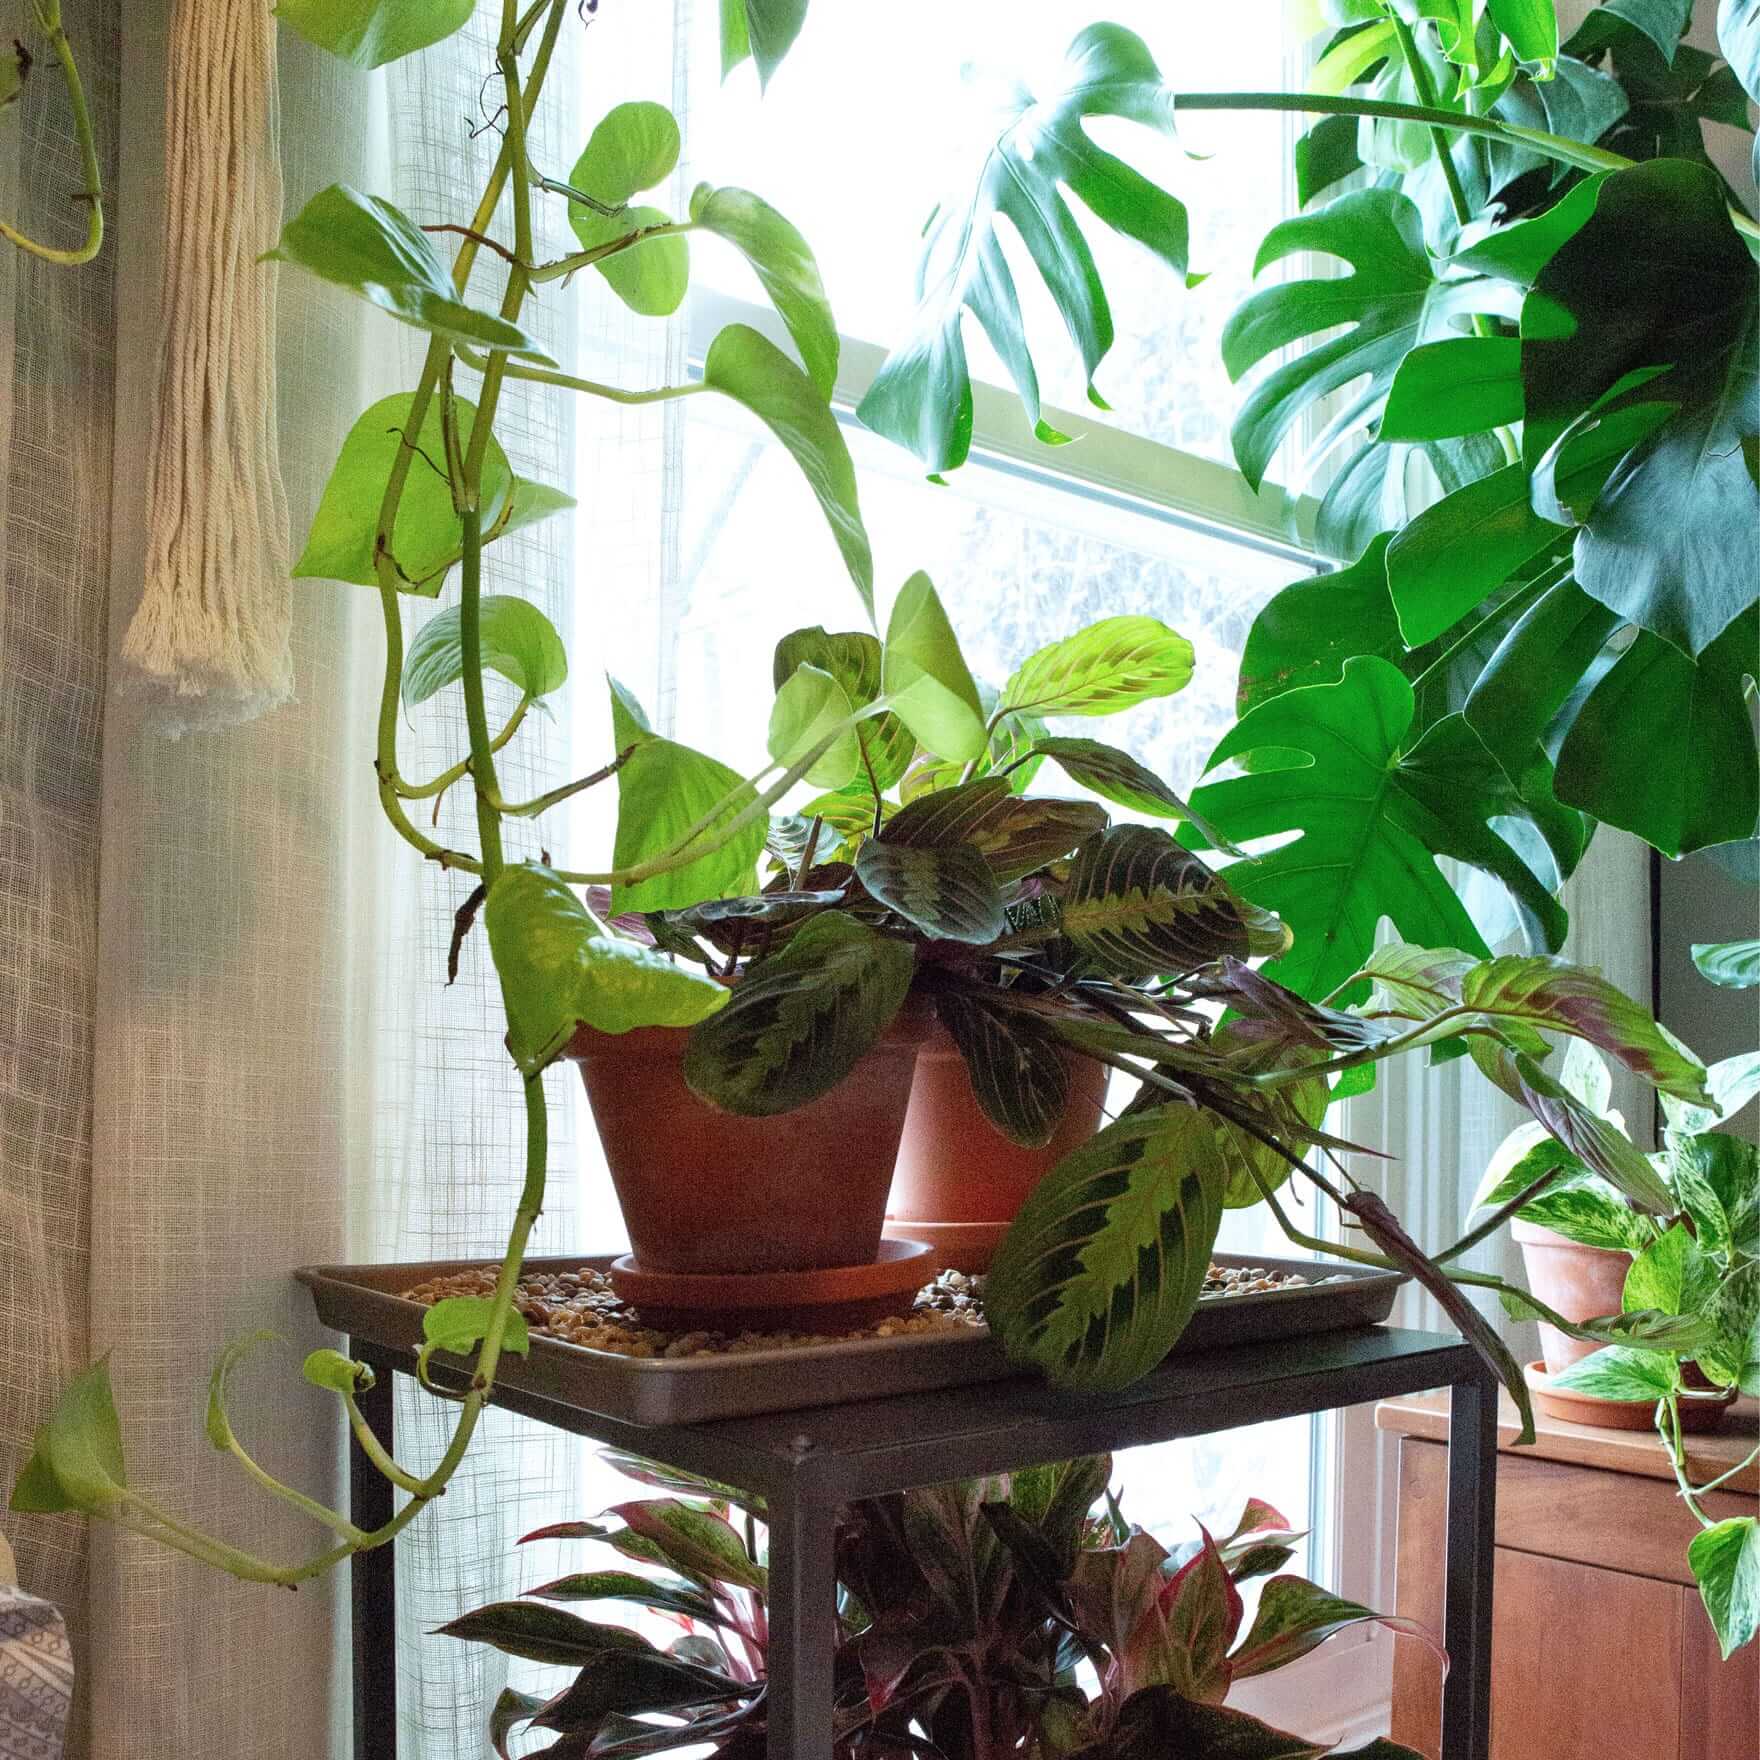 Caring for your plants while you're away